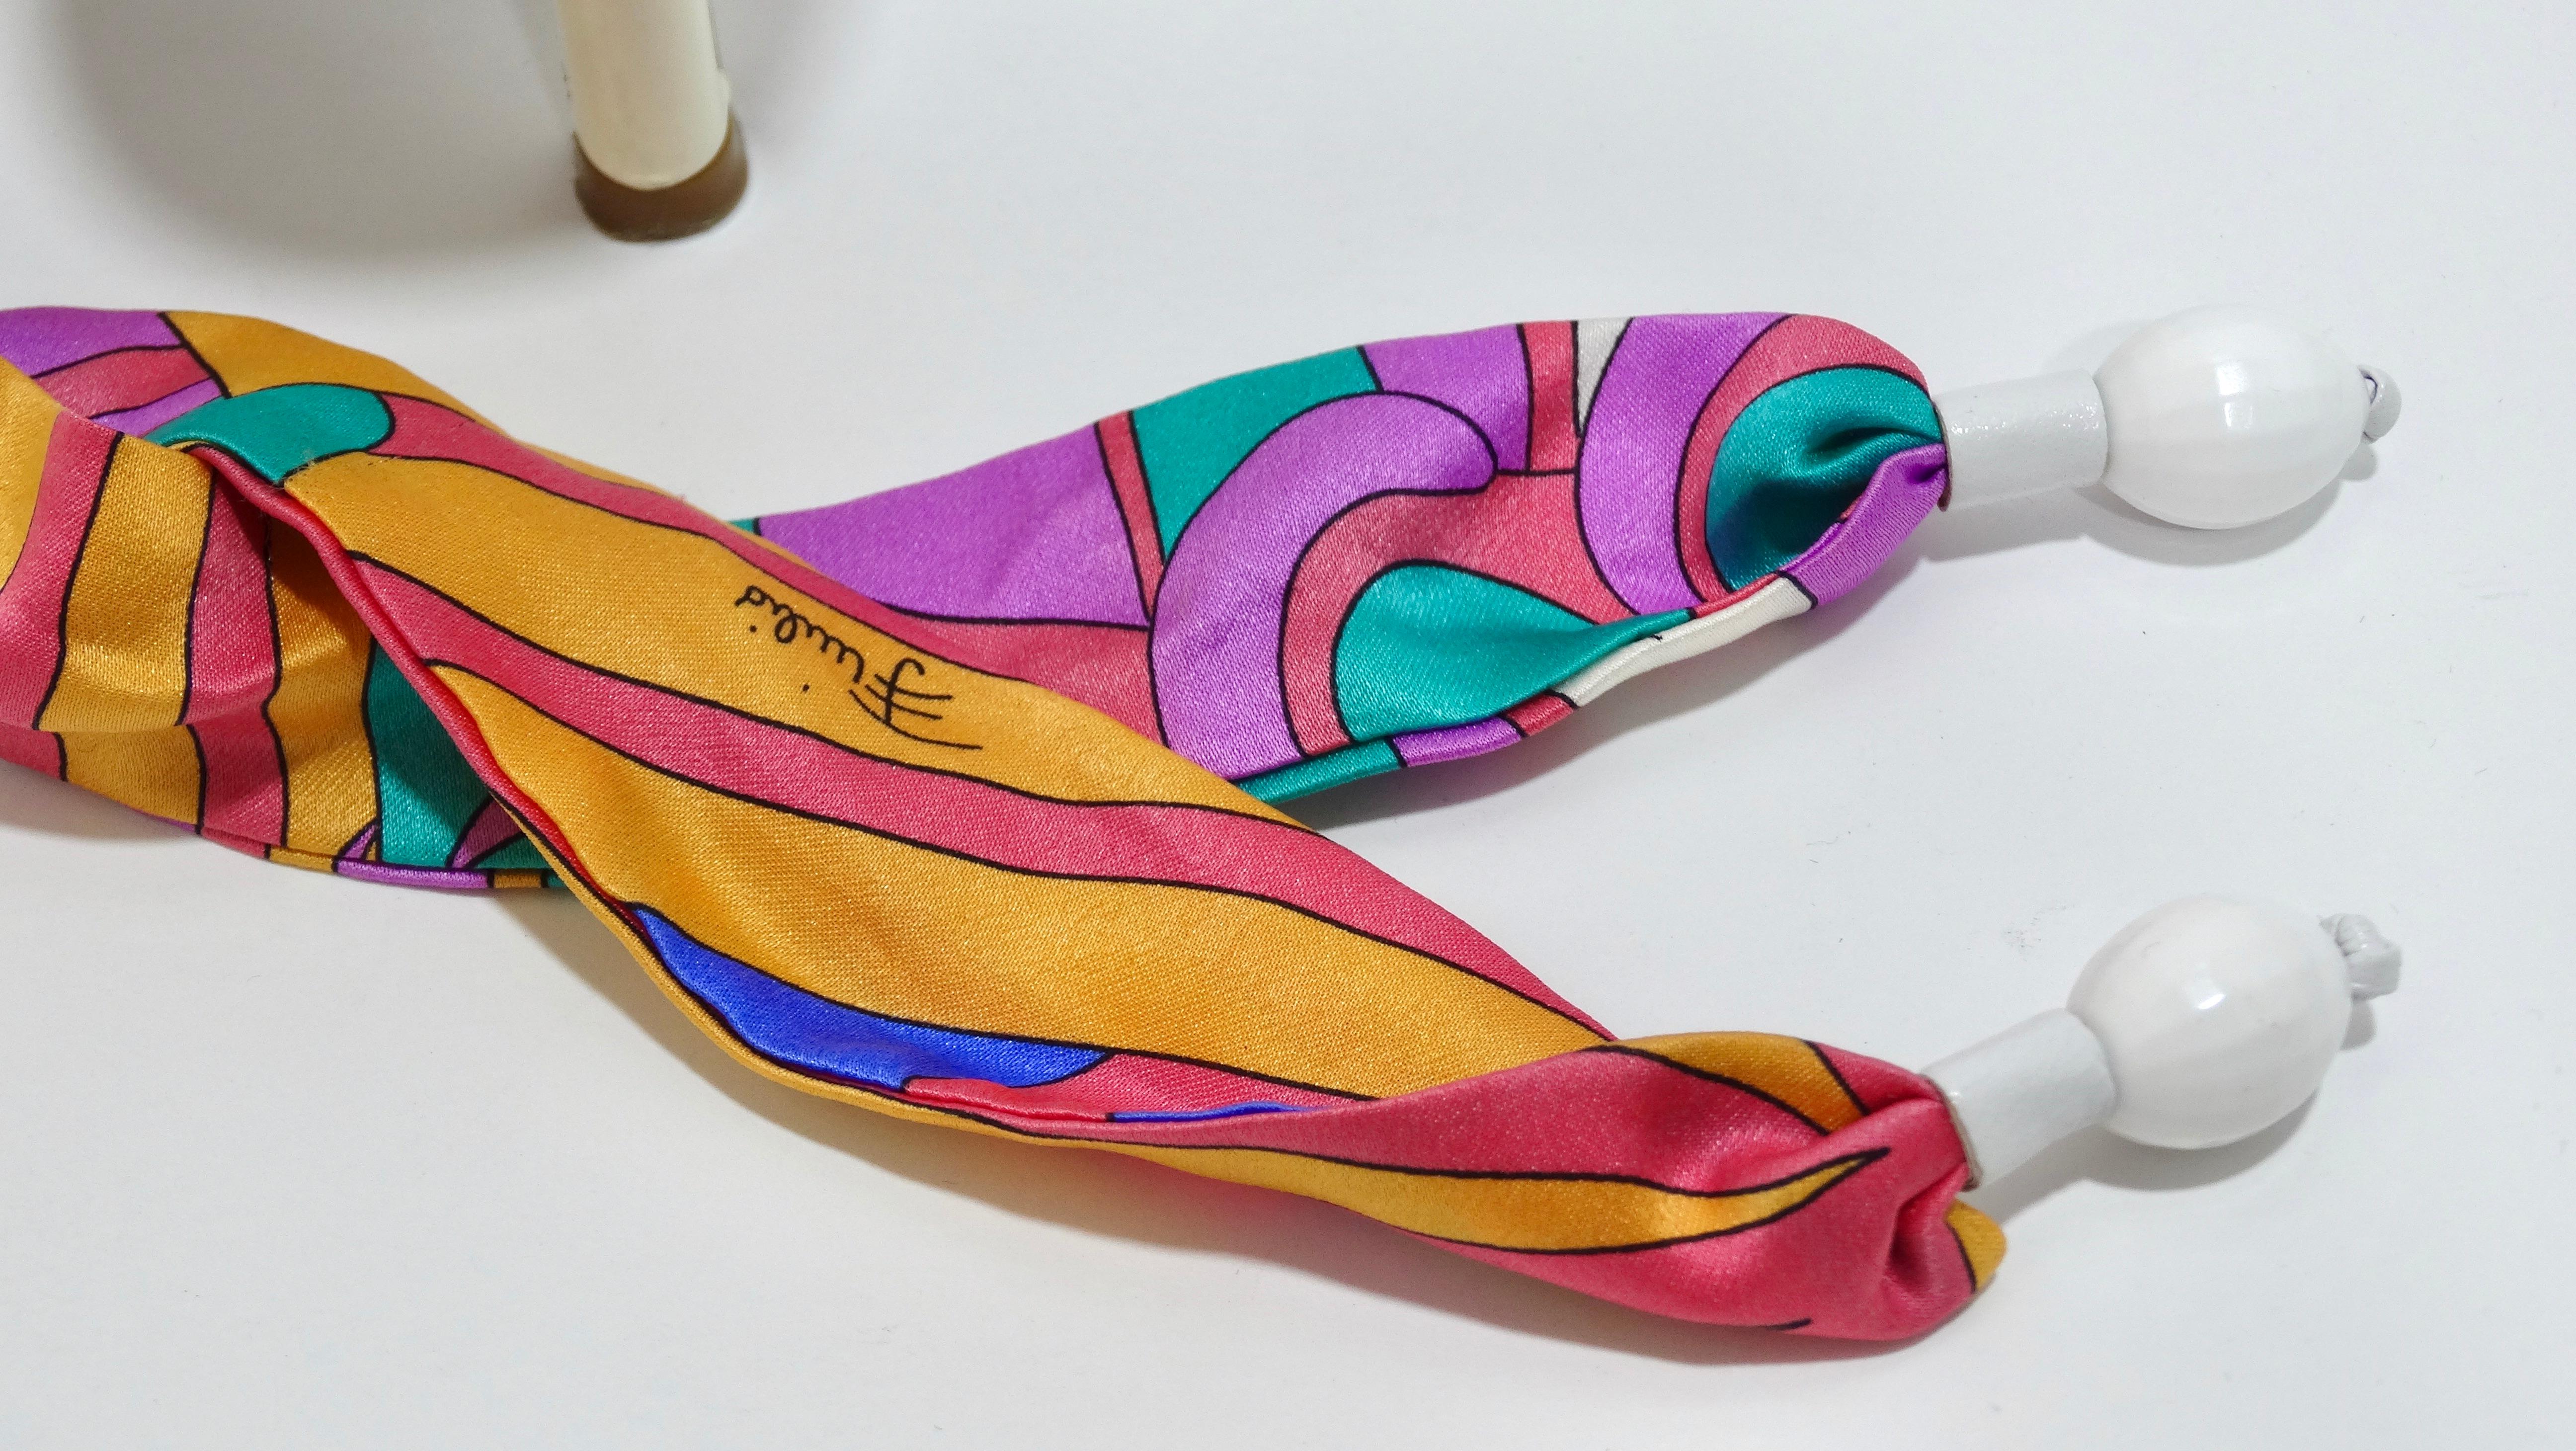 Pucci Multi-Color Satin Tie Sandal Heels In Excellent Condition For Sale In Scottsdale, AZ